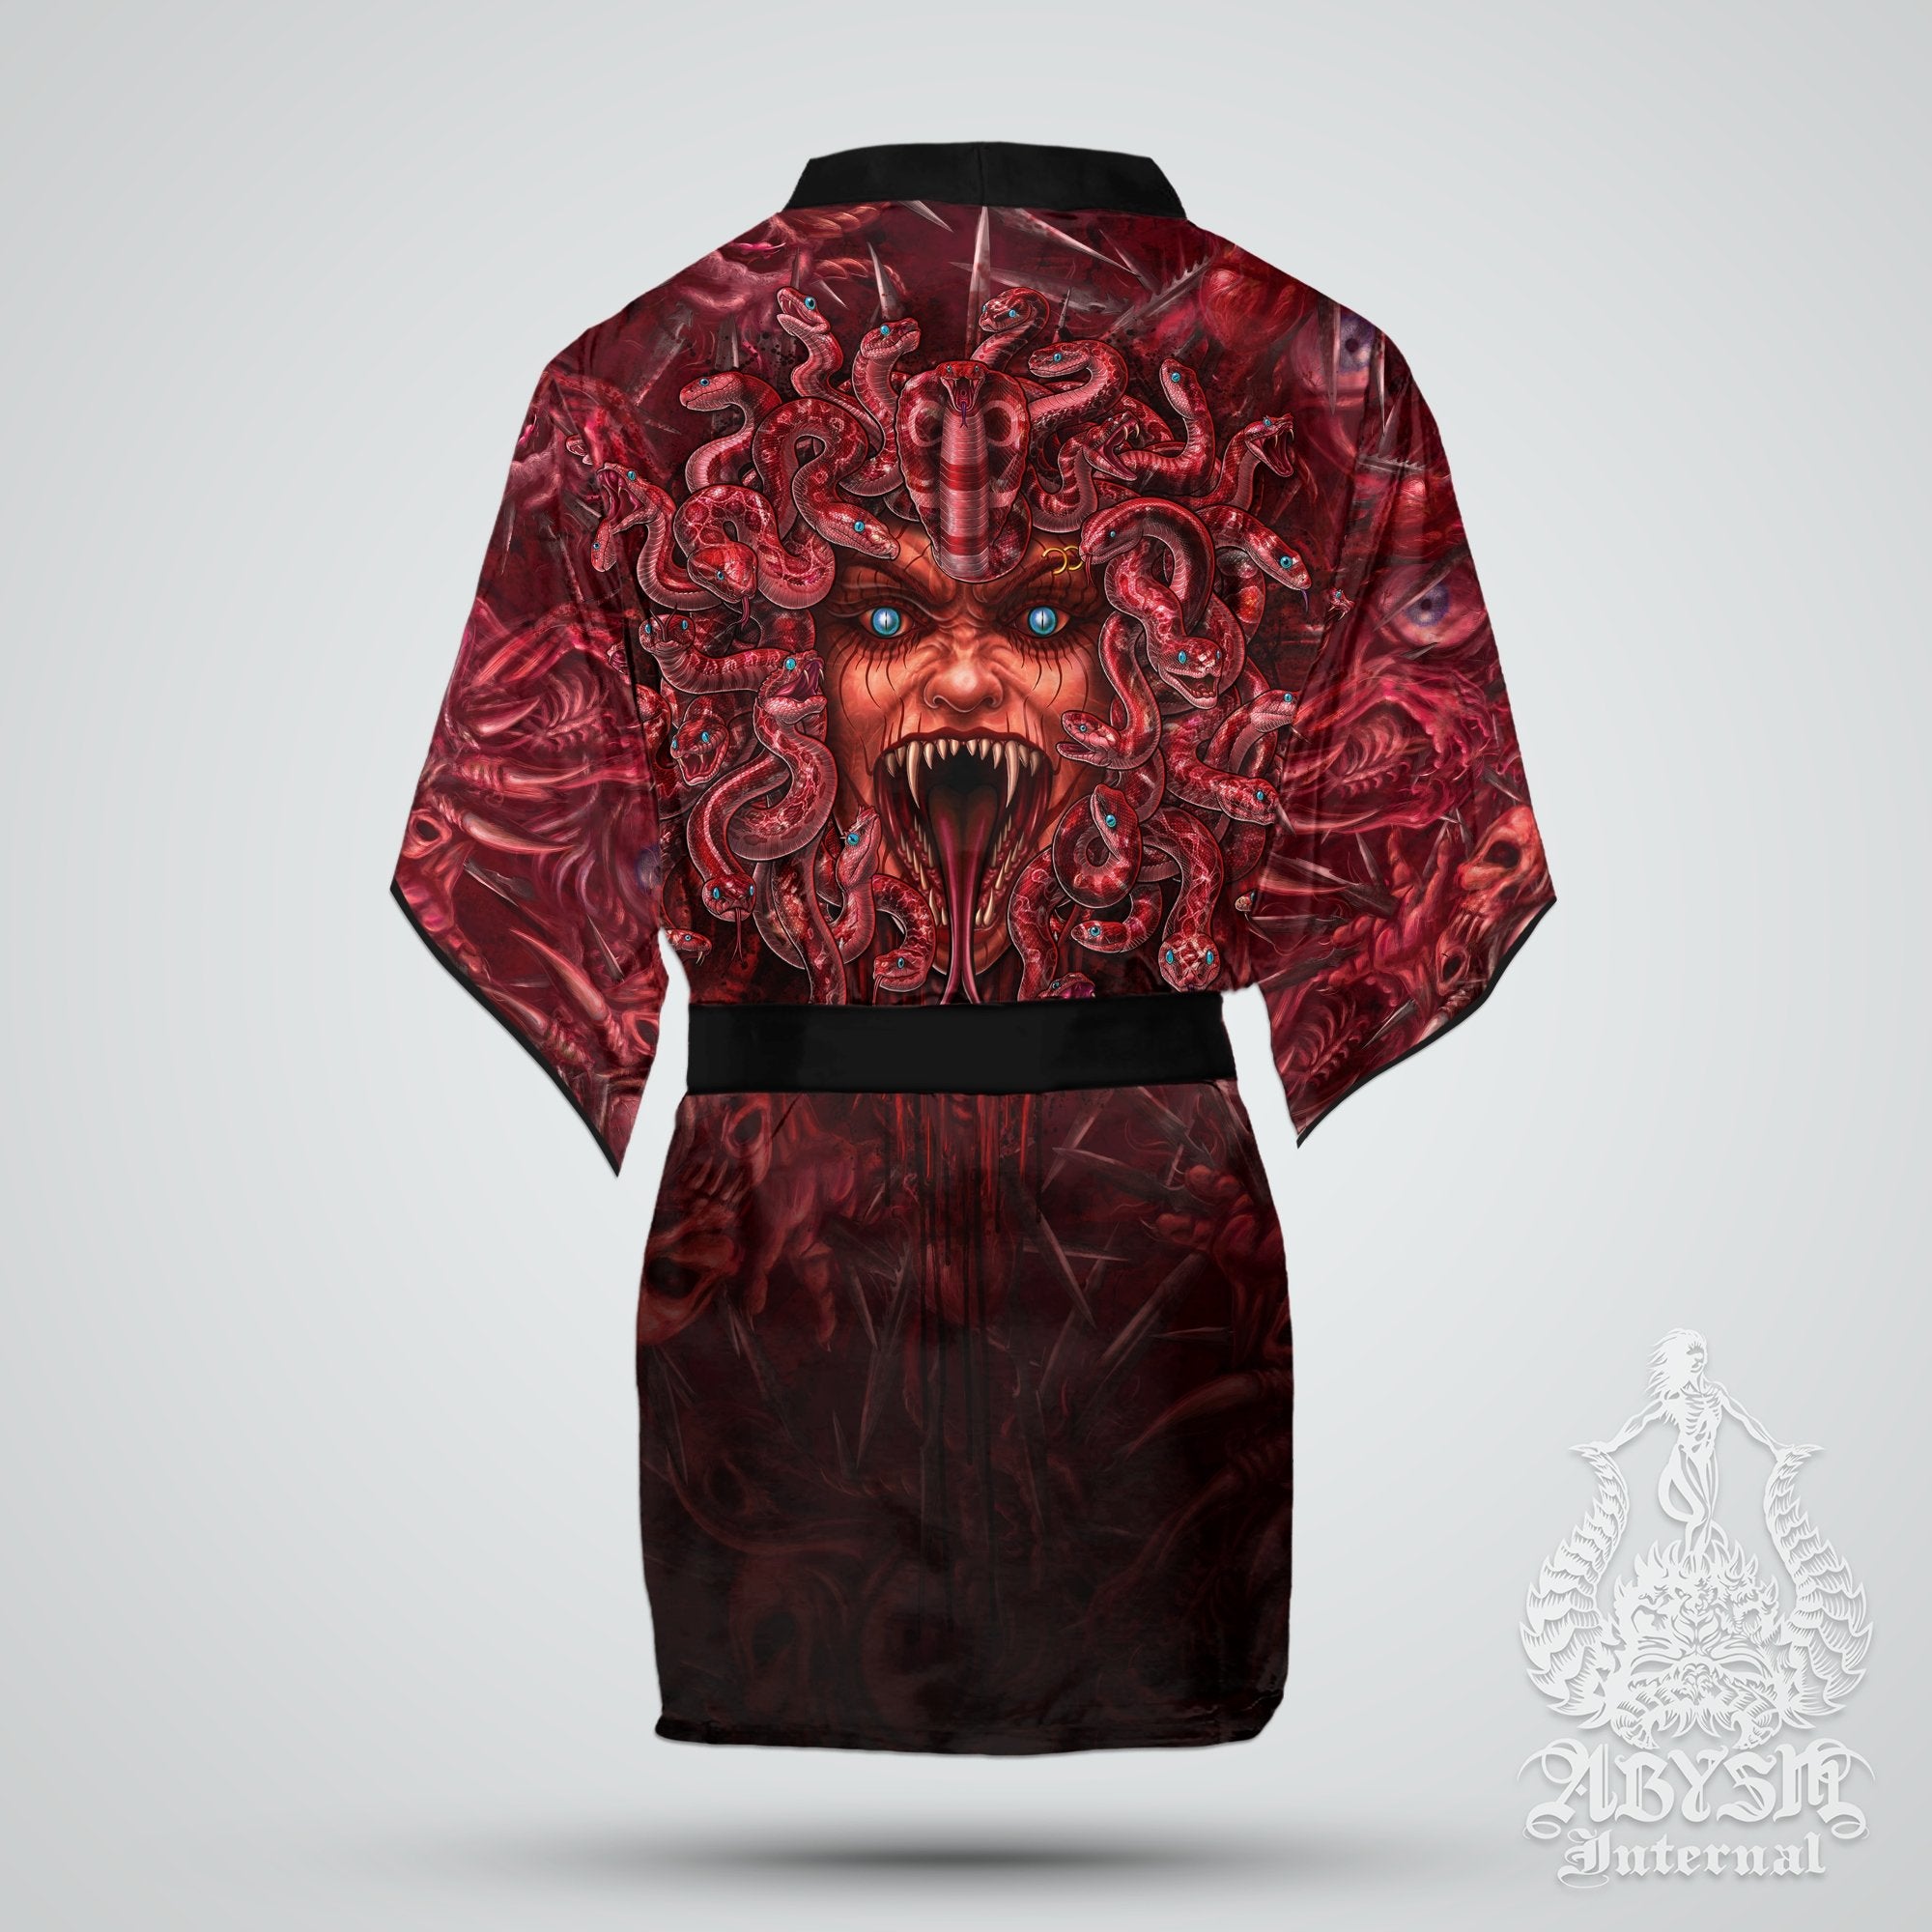 Medusa Cover Up, Beach Outfit, Party Kimono, Halloween Summer Festival Robe, Indie and Alternative Clothing, Unisex - Horror, Gore and Blood - Abysm Internal